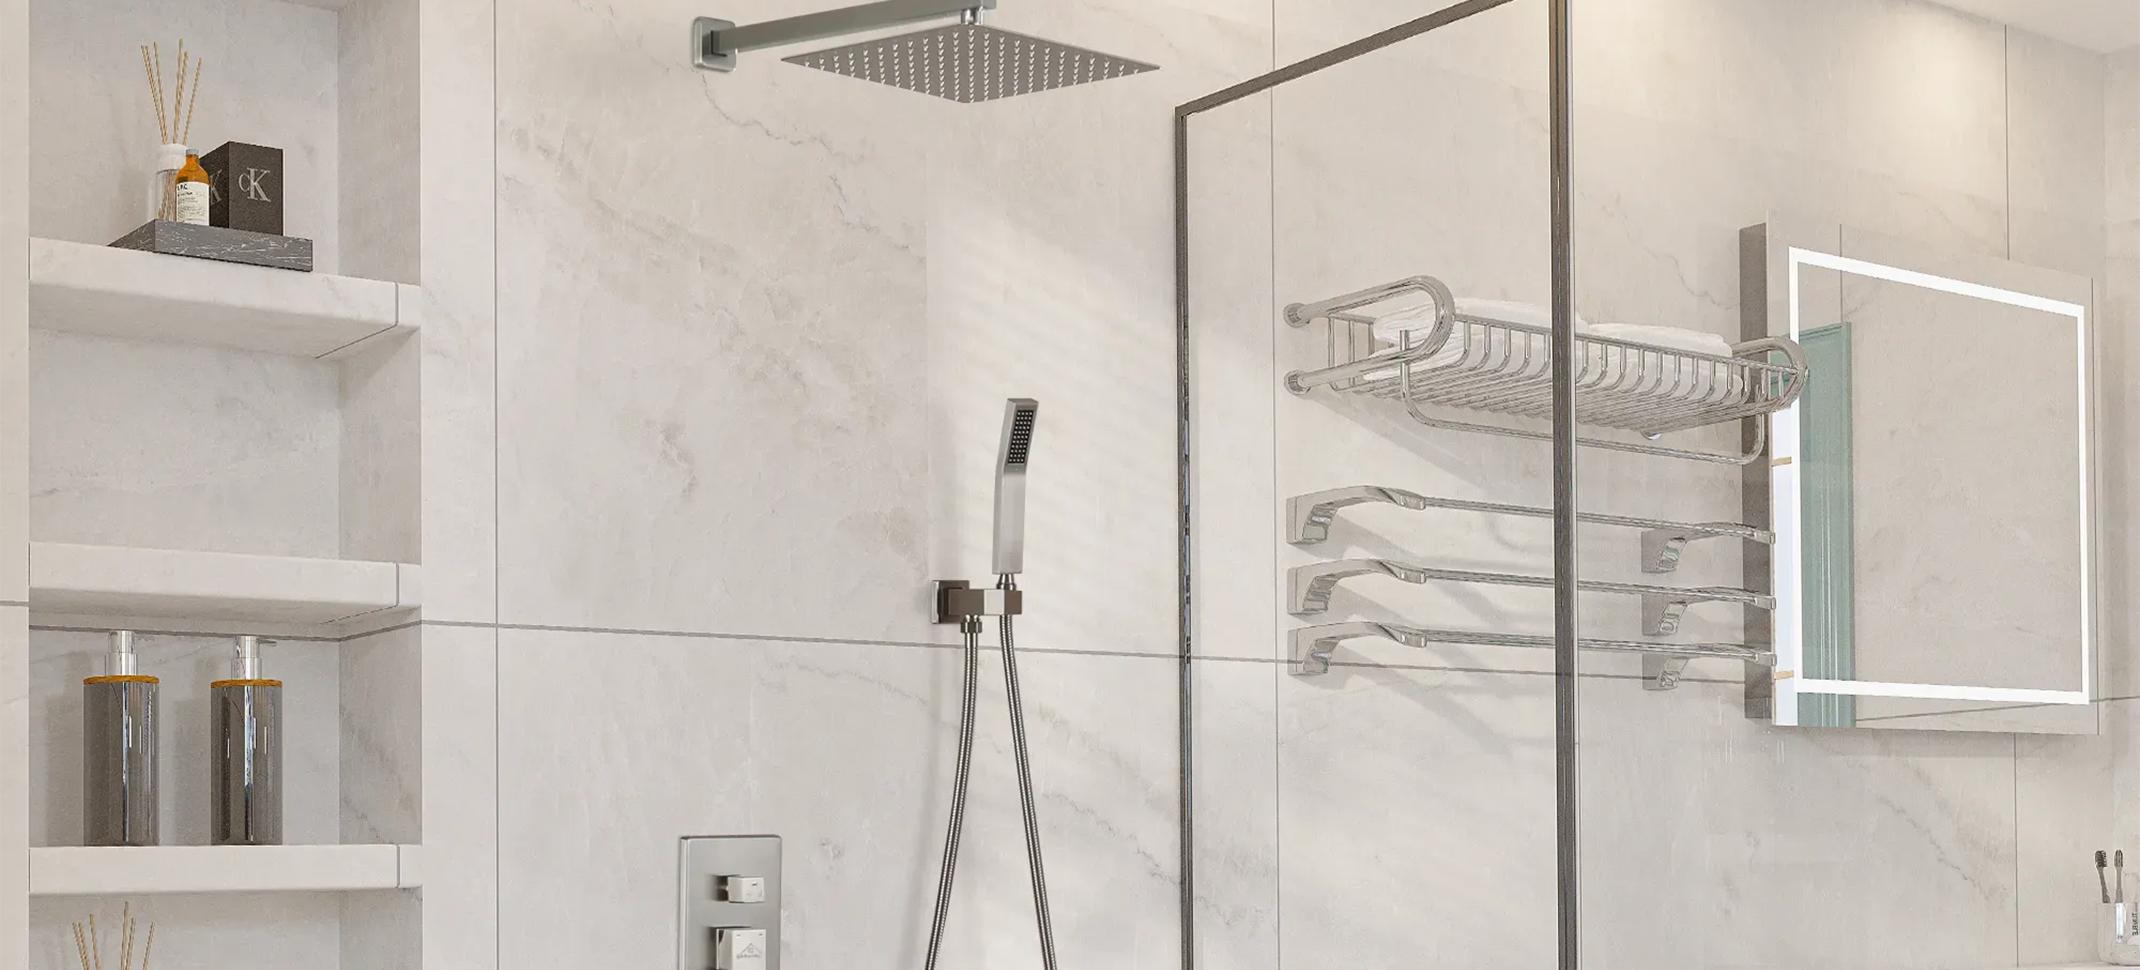 Plumbing Deals - Tub & Shower Systems